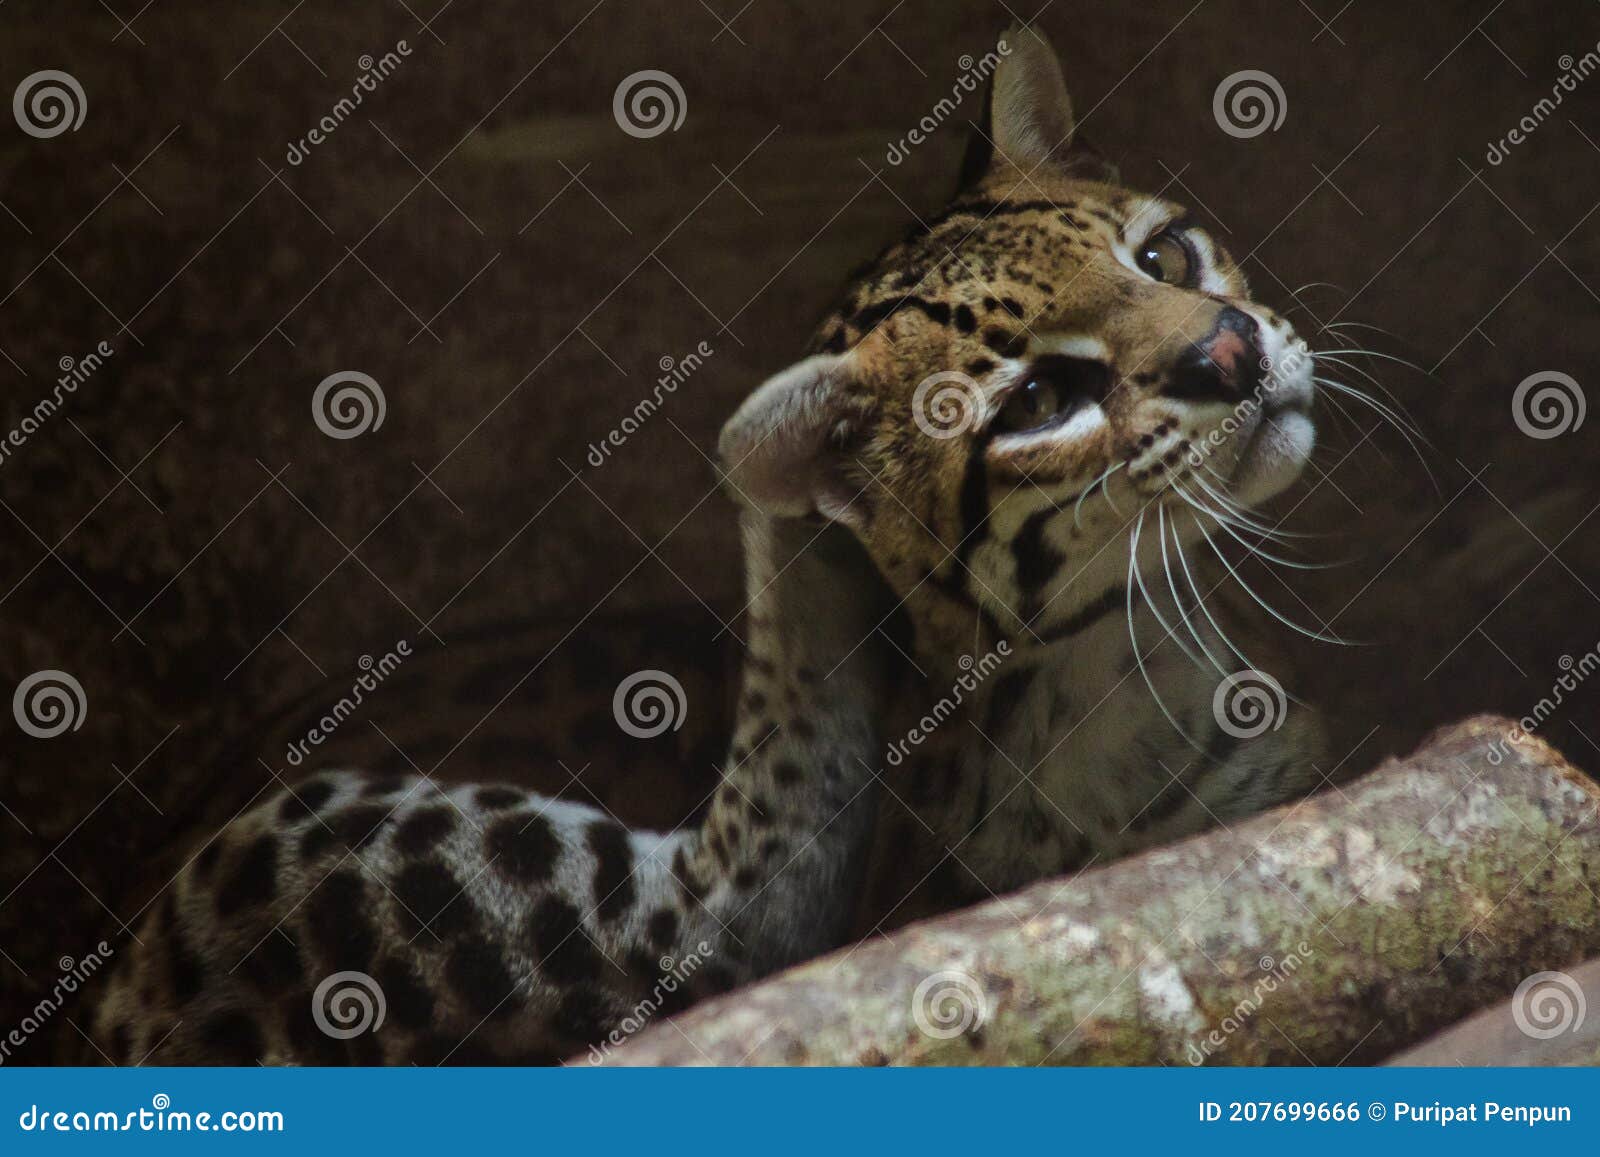 ocelot on a branch exhibited in the zoo